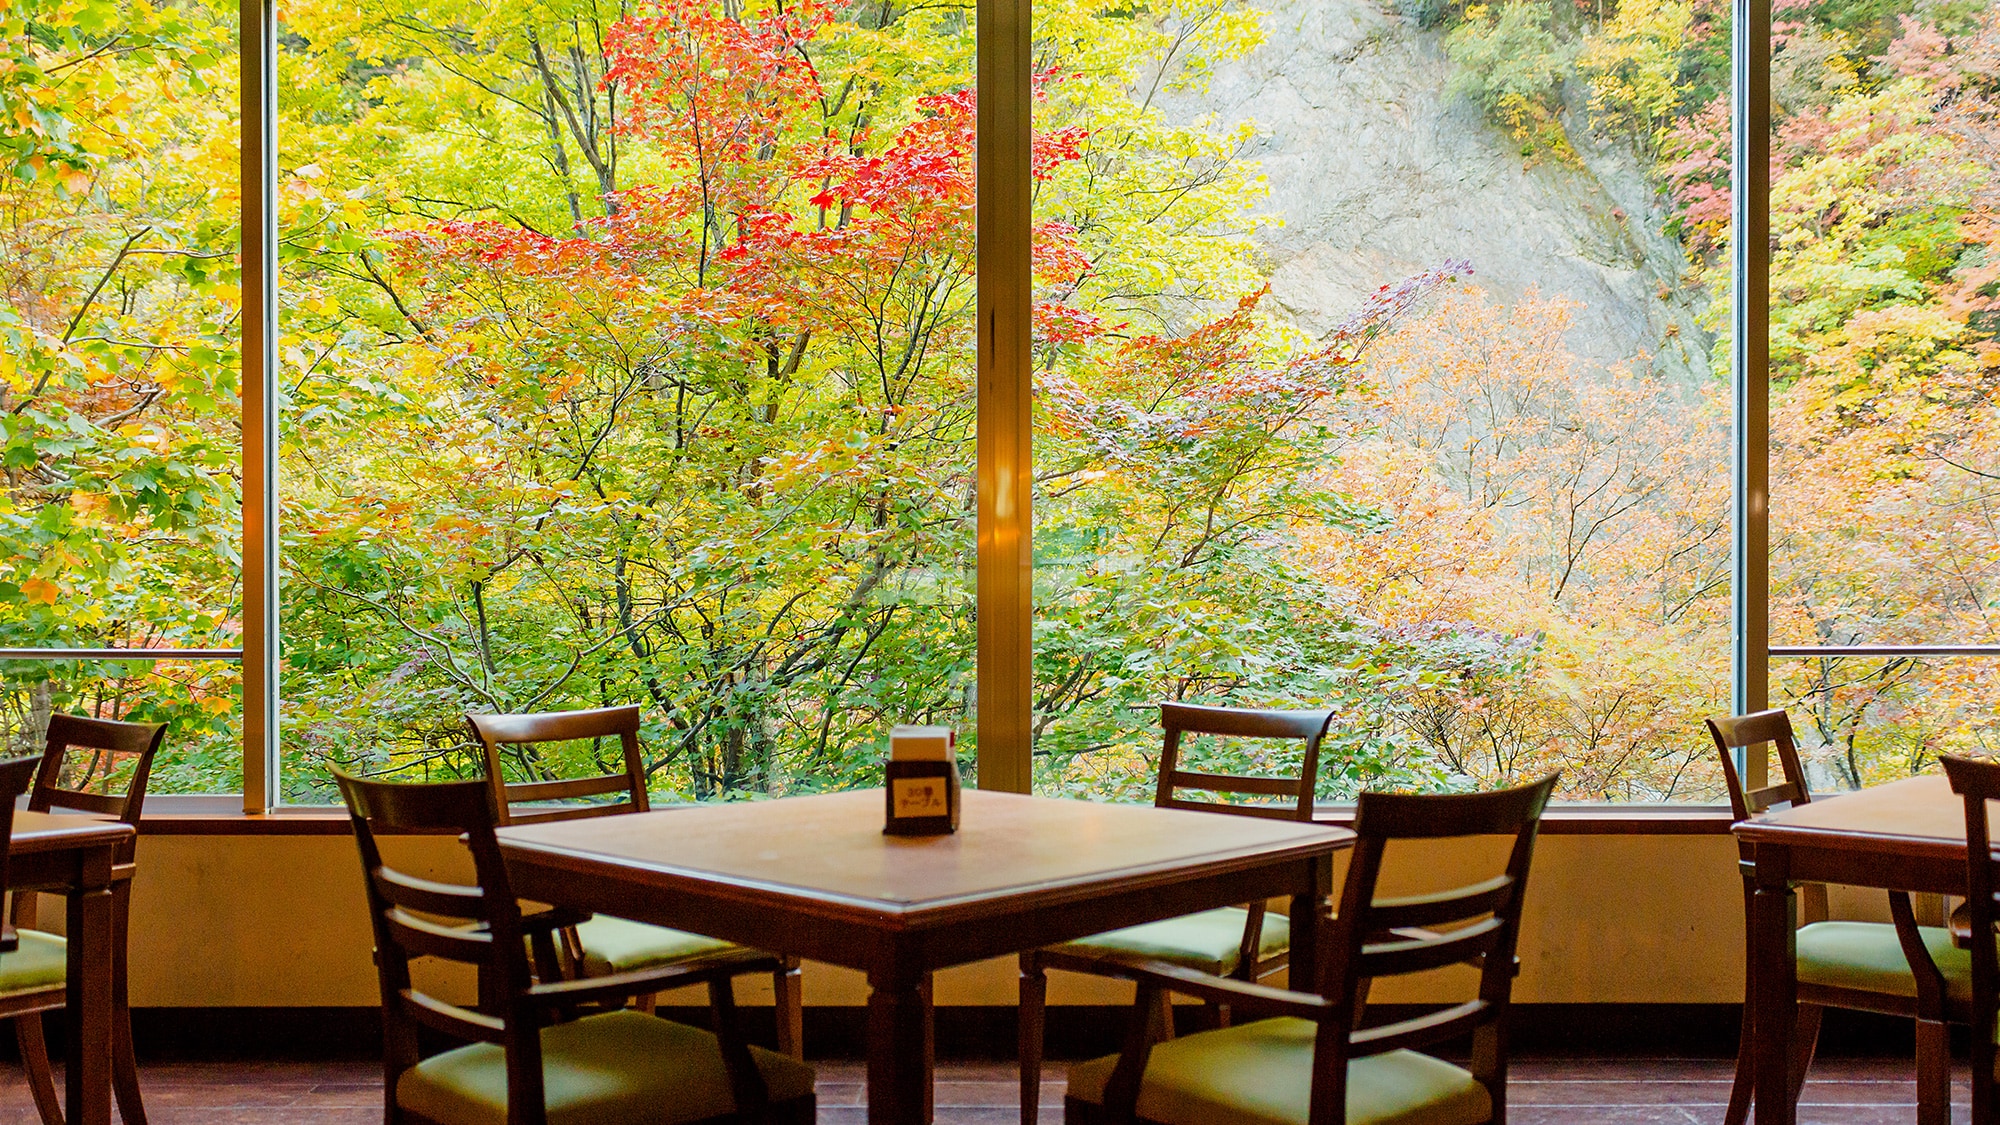 [Le Matterhorn] A restaurant with a magnificent view of the autumn leaves in front of you